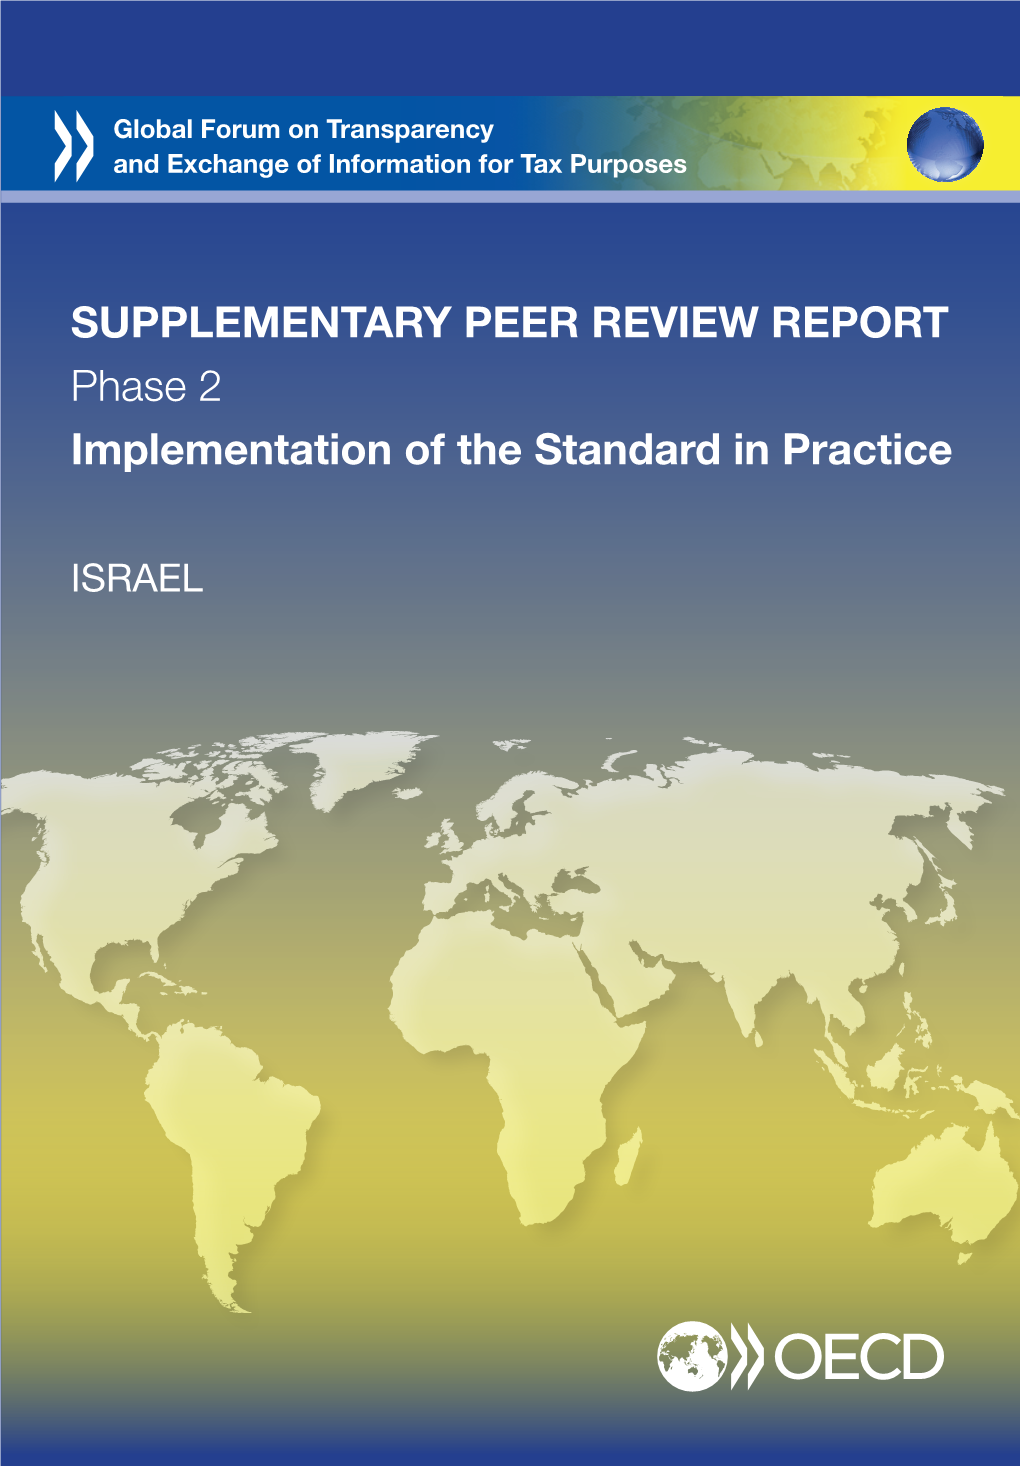 SUPPLEMENTARY PEER REVIEW REPORT Phase 2 Implementation of the Standard in Practice